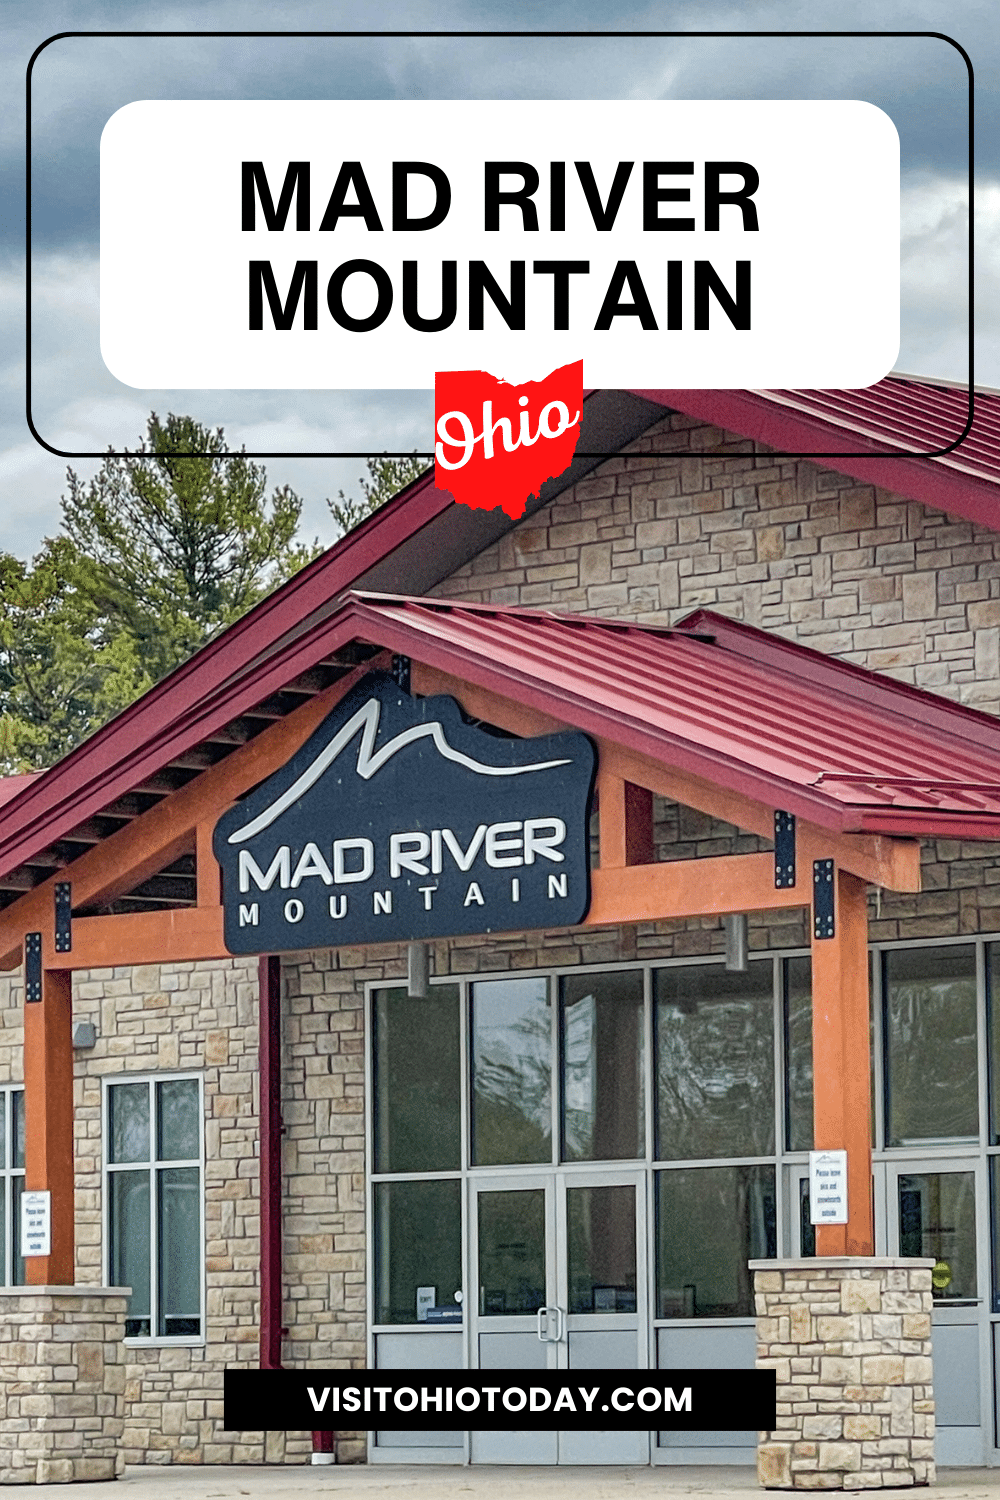 Mad River Mountain is the largest ski and snowboard resort in Ohio. It is located 45 minutes outside of Columbus in Zanesfield.